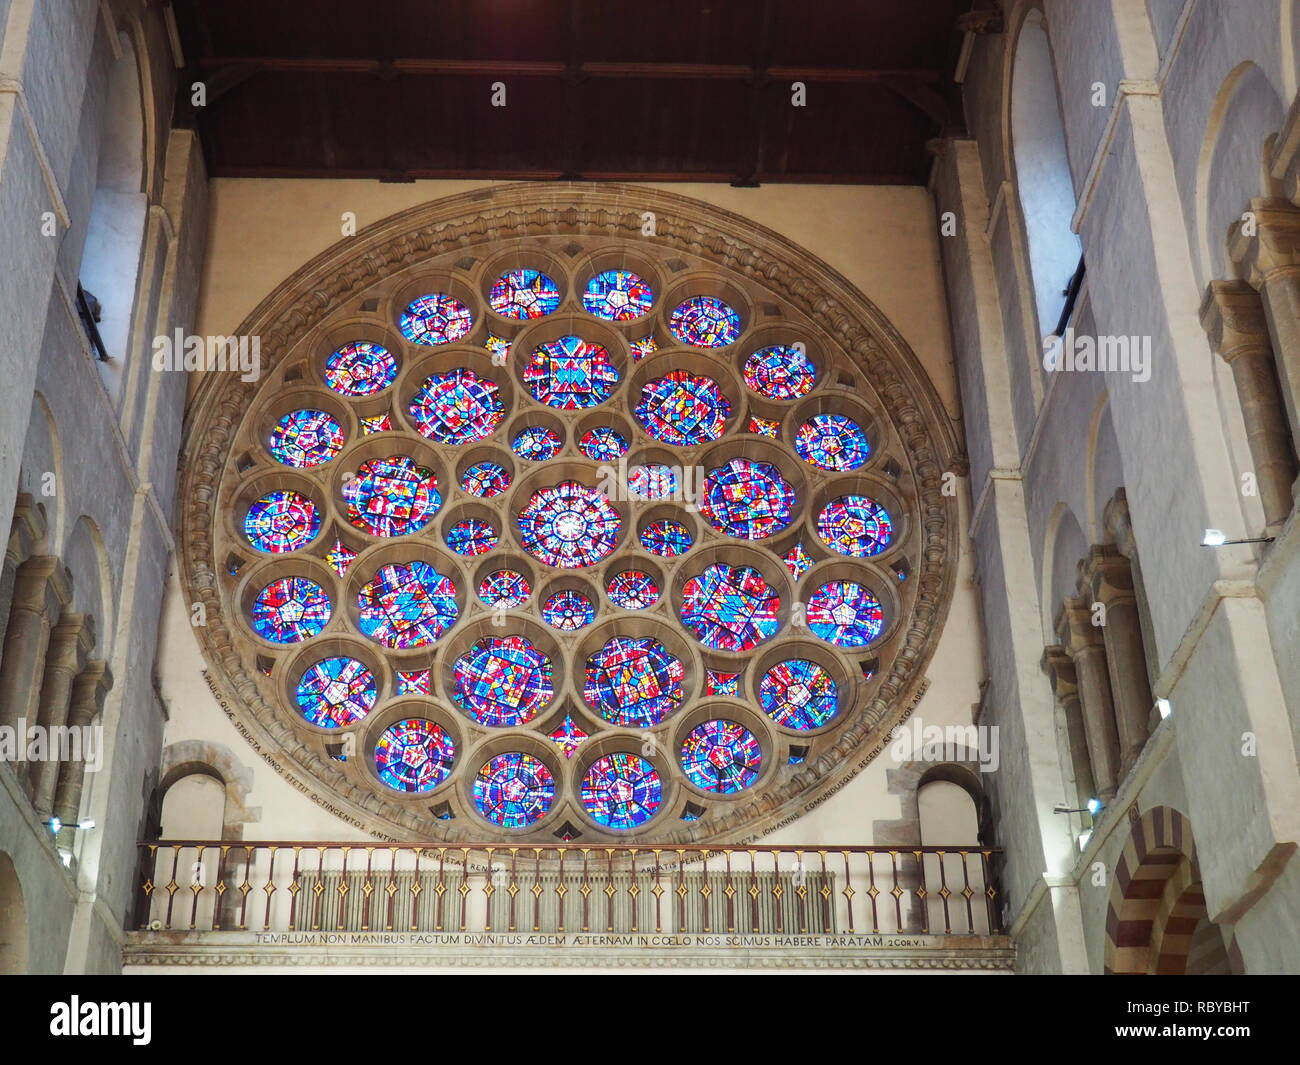 Amazing colorful Rose Window - St.Albans Cathderal - St. Albans Stock Photo